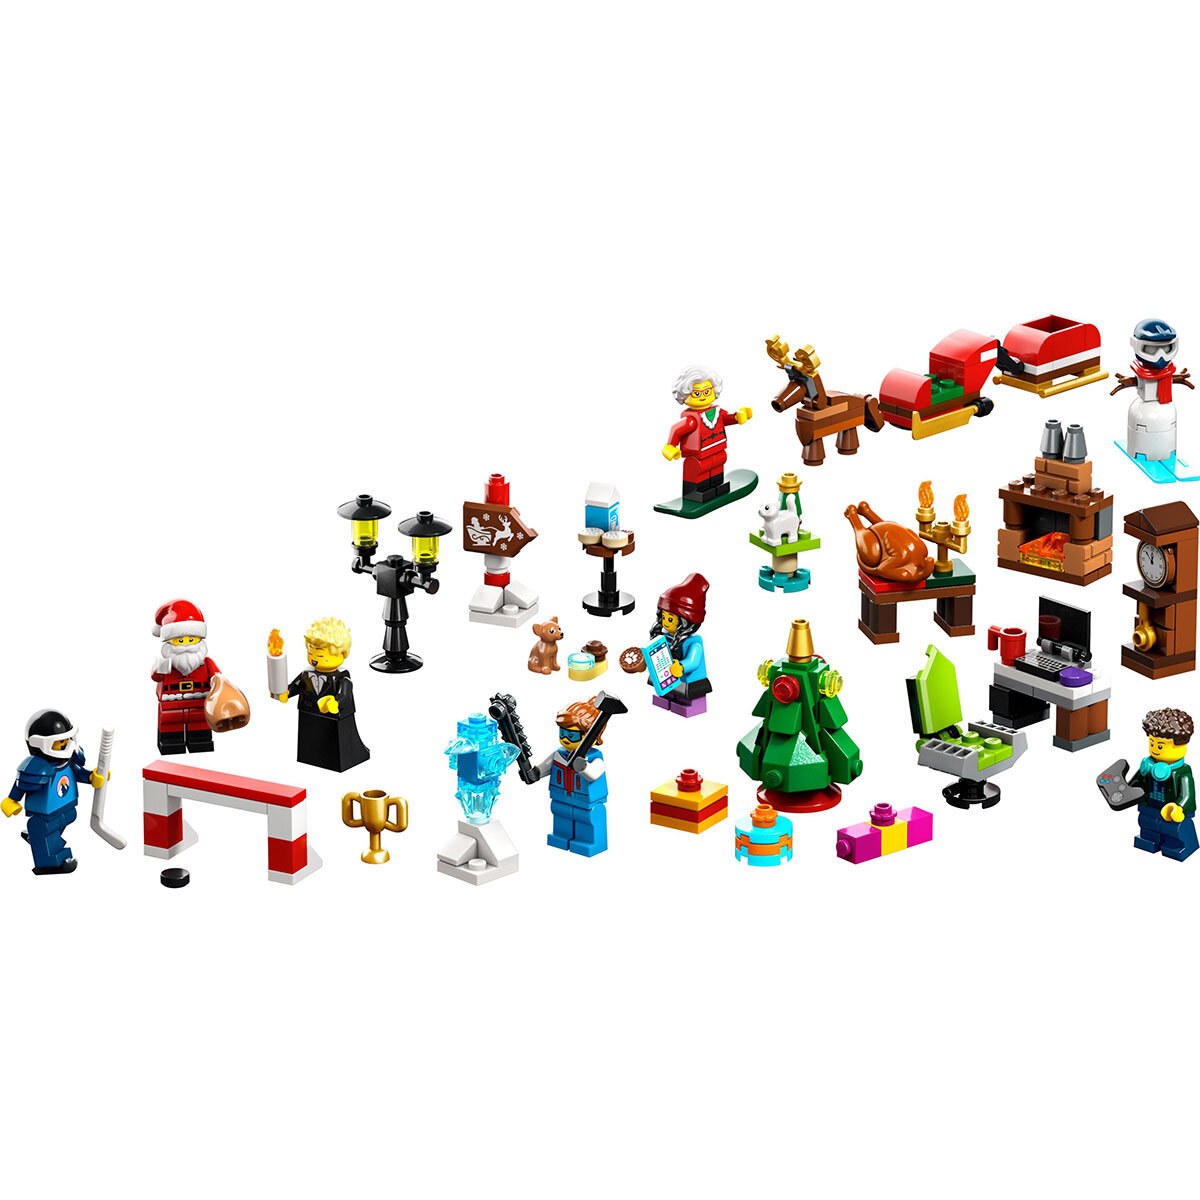 Buy LEGO City Advent Calendar Overview Image at Costco.co.uk